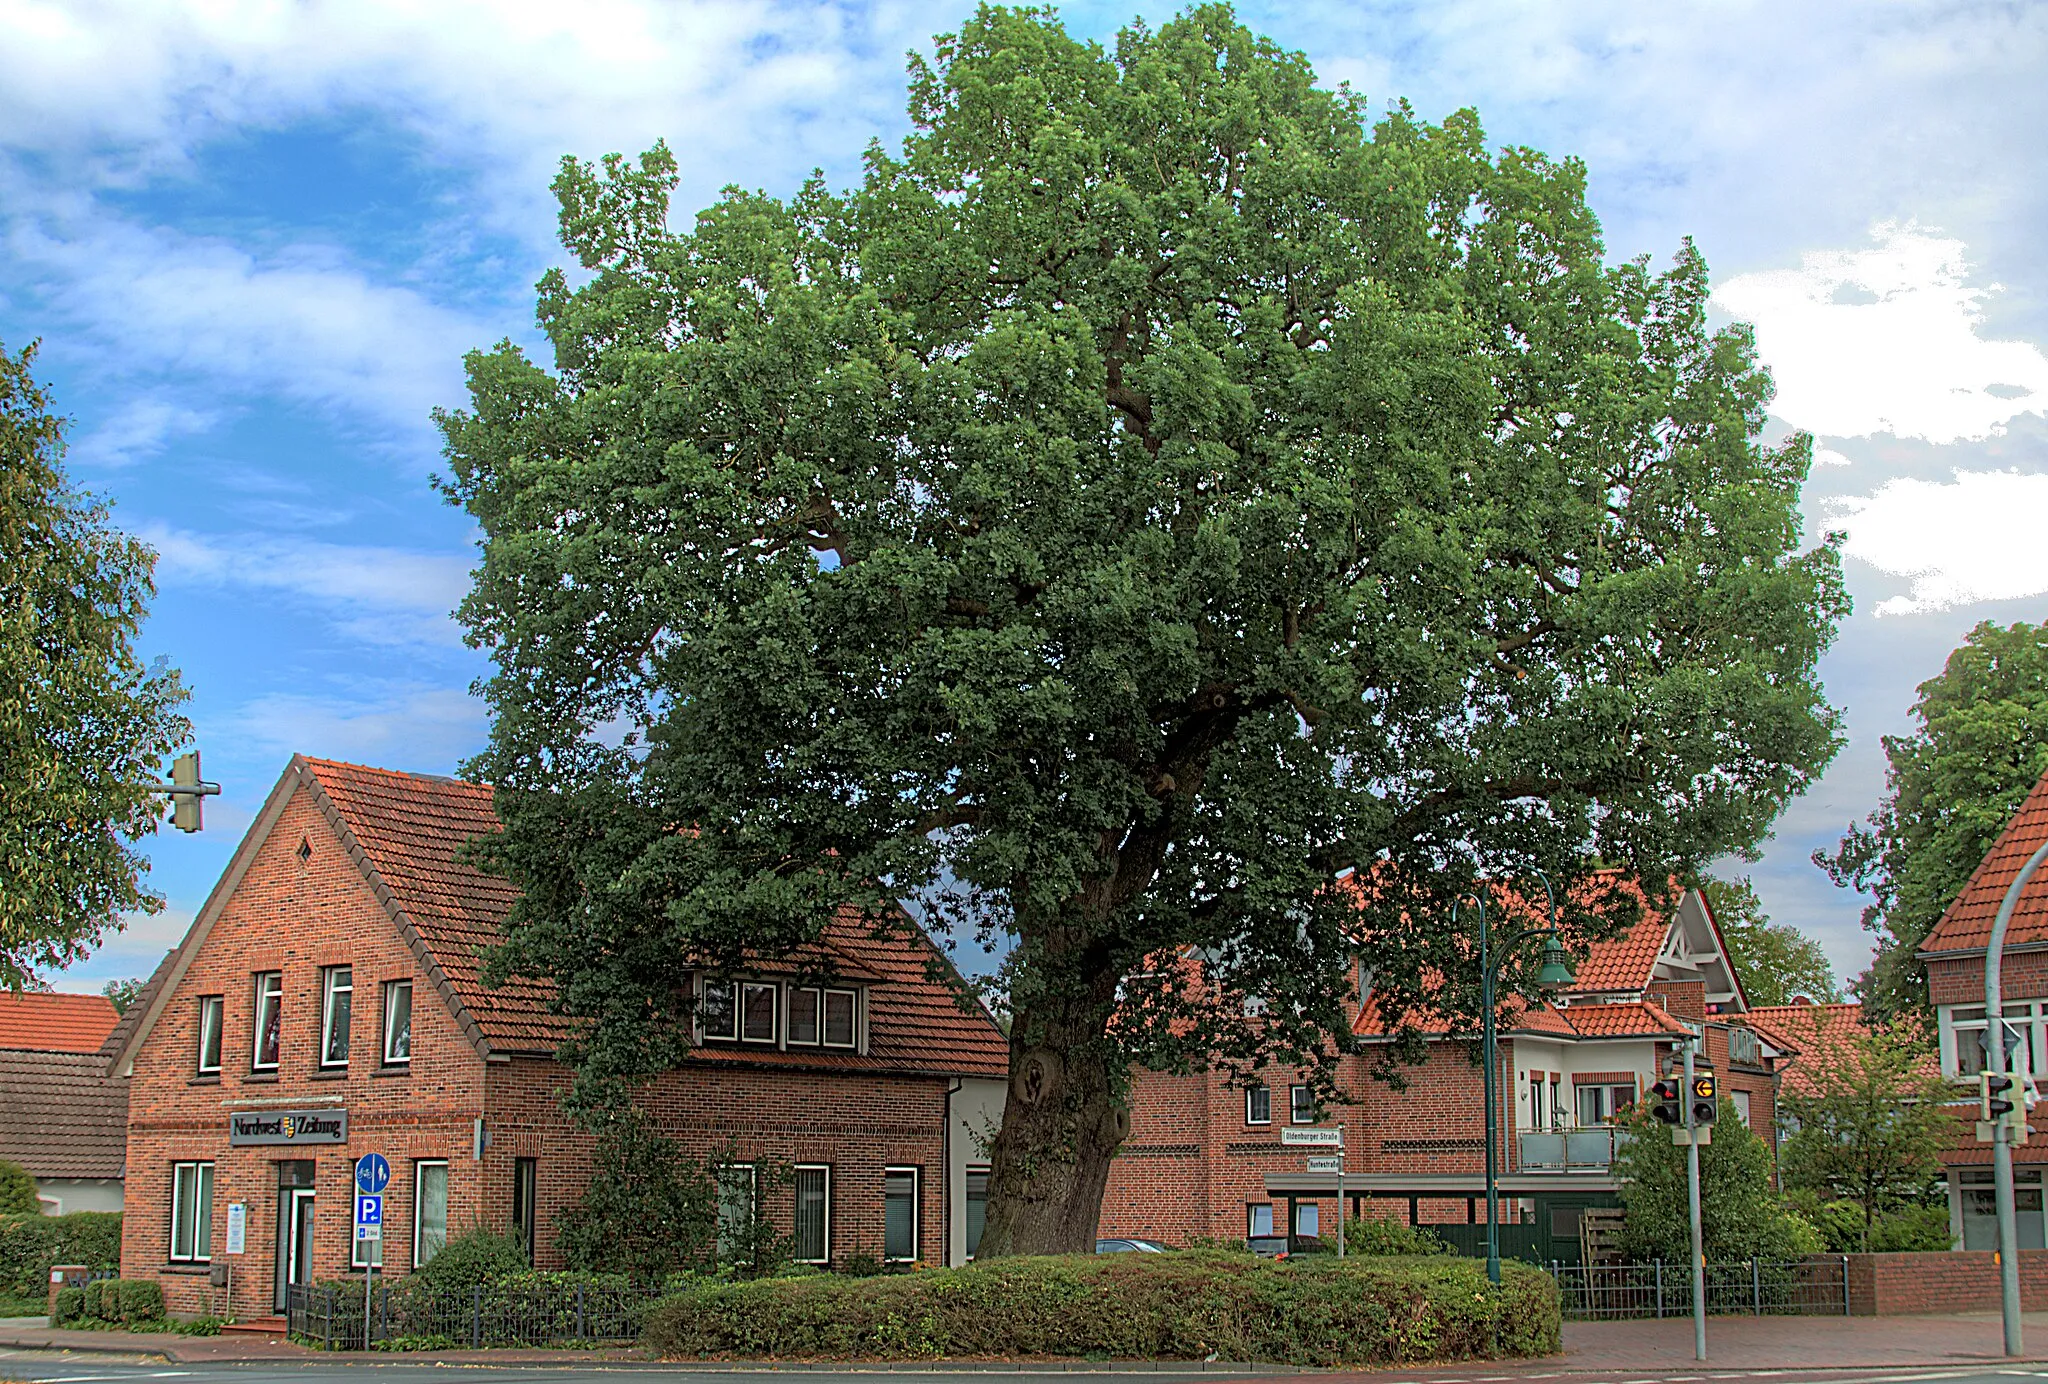 Photo showing: Popken's Oak, a ~350 year old common oak by the road crossing Oldenburger Straße × Huntestraße in downtown Wardenburg, Lower Saxony, Germany, seen in southeastern direction. On the left, the local office of the Nordwest-Zeitung newspaper is visible.